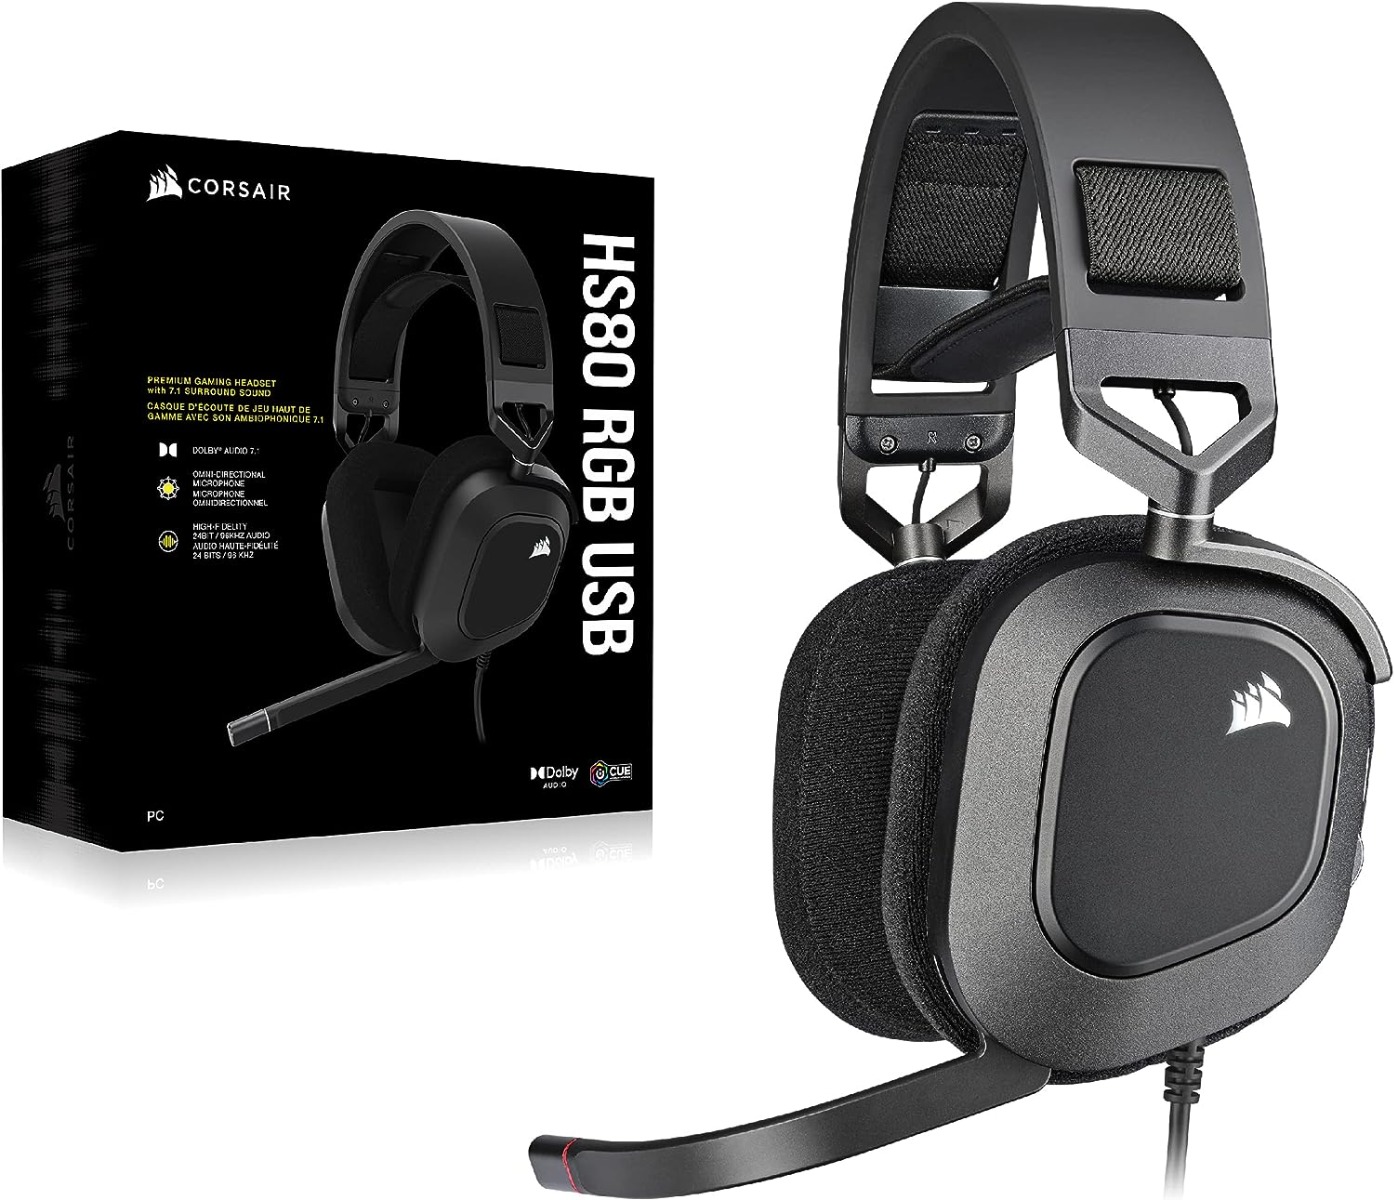 Corsair HS80 RGB USB Premium Gaming Headset with Dolby Audio 7.1 Surround Sound - Carbon